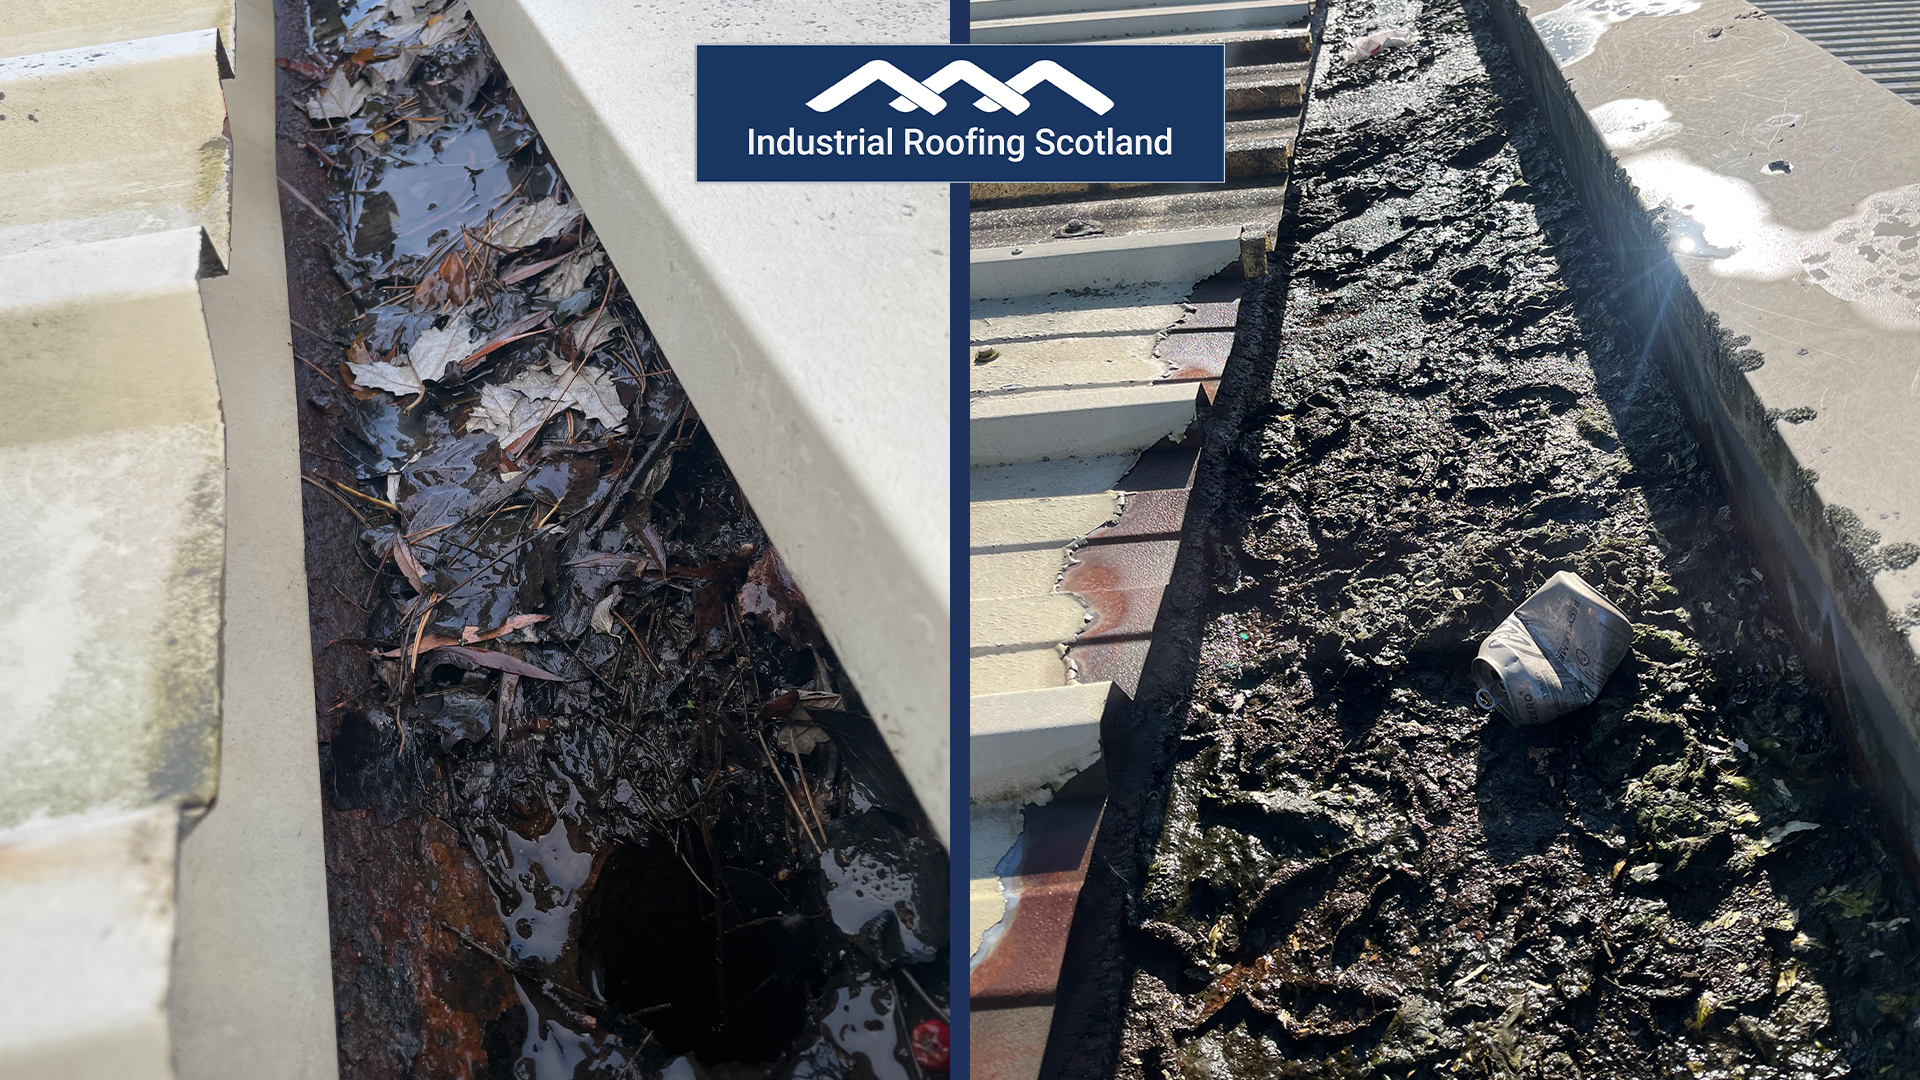 Clogged gutters are a common source of persistent gutter leaks